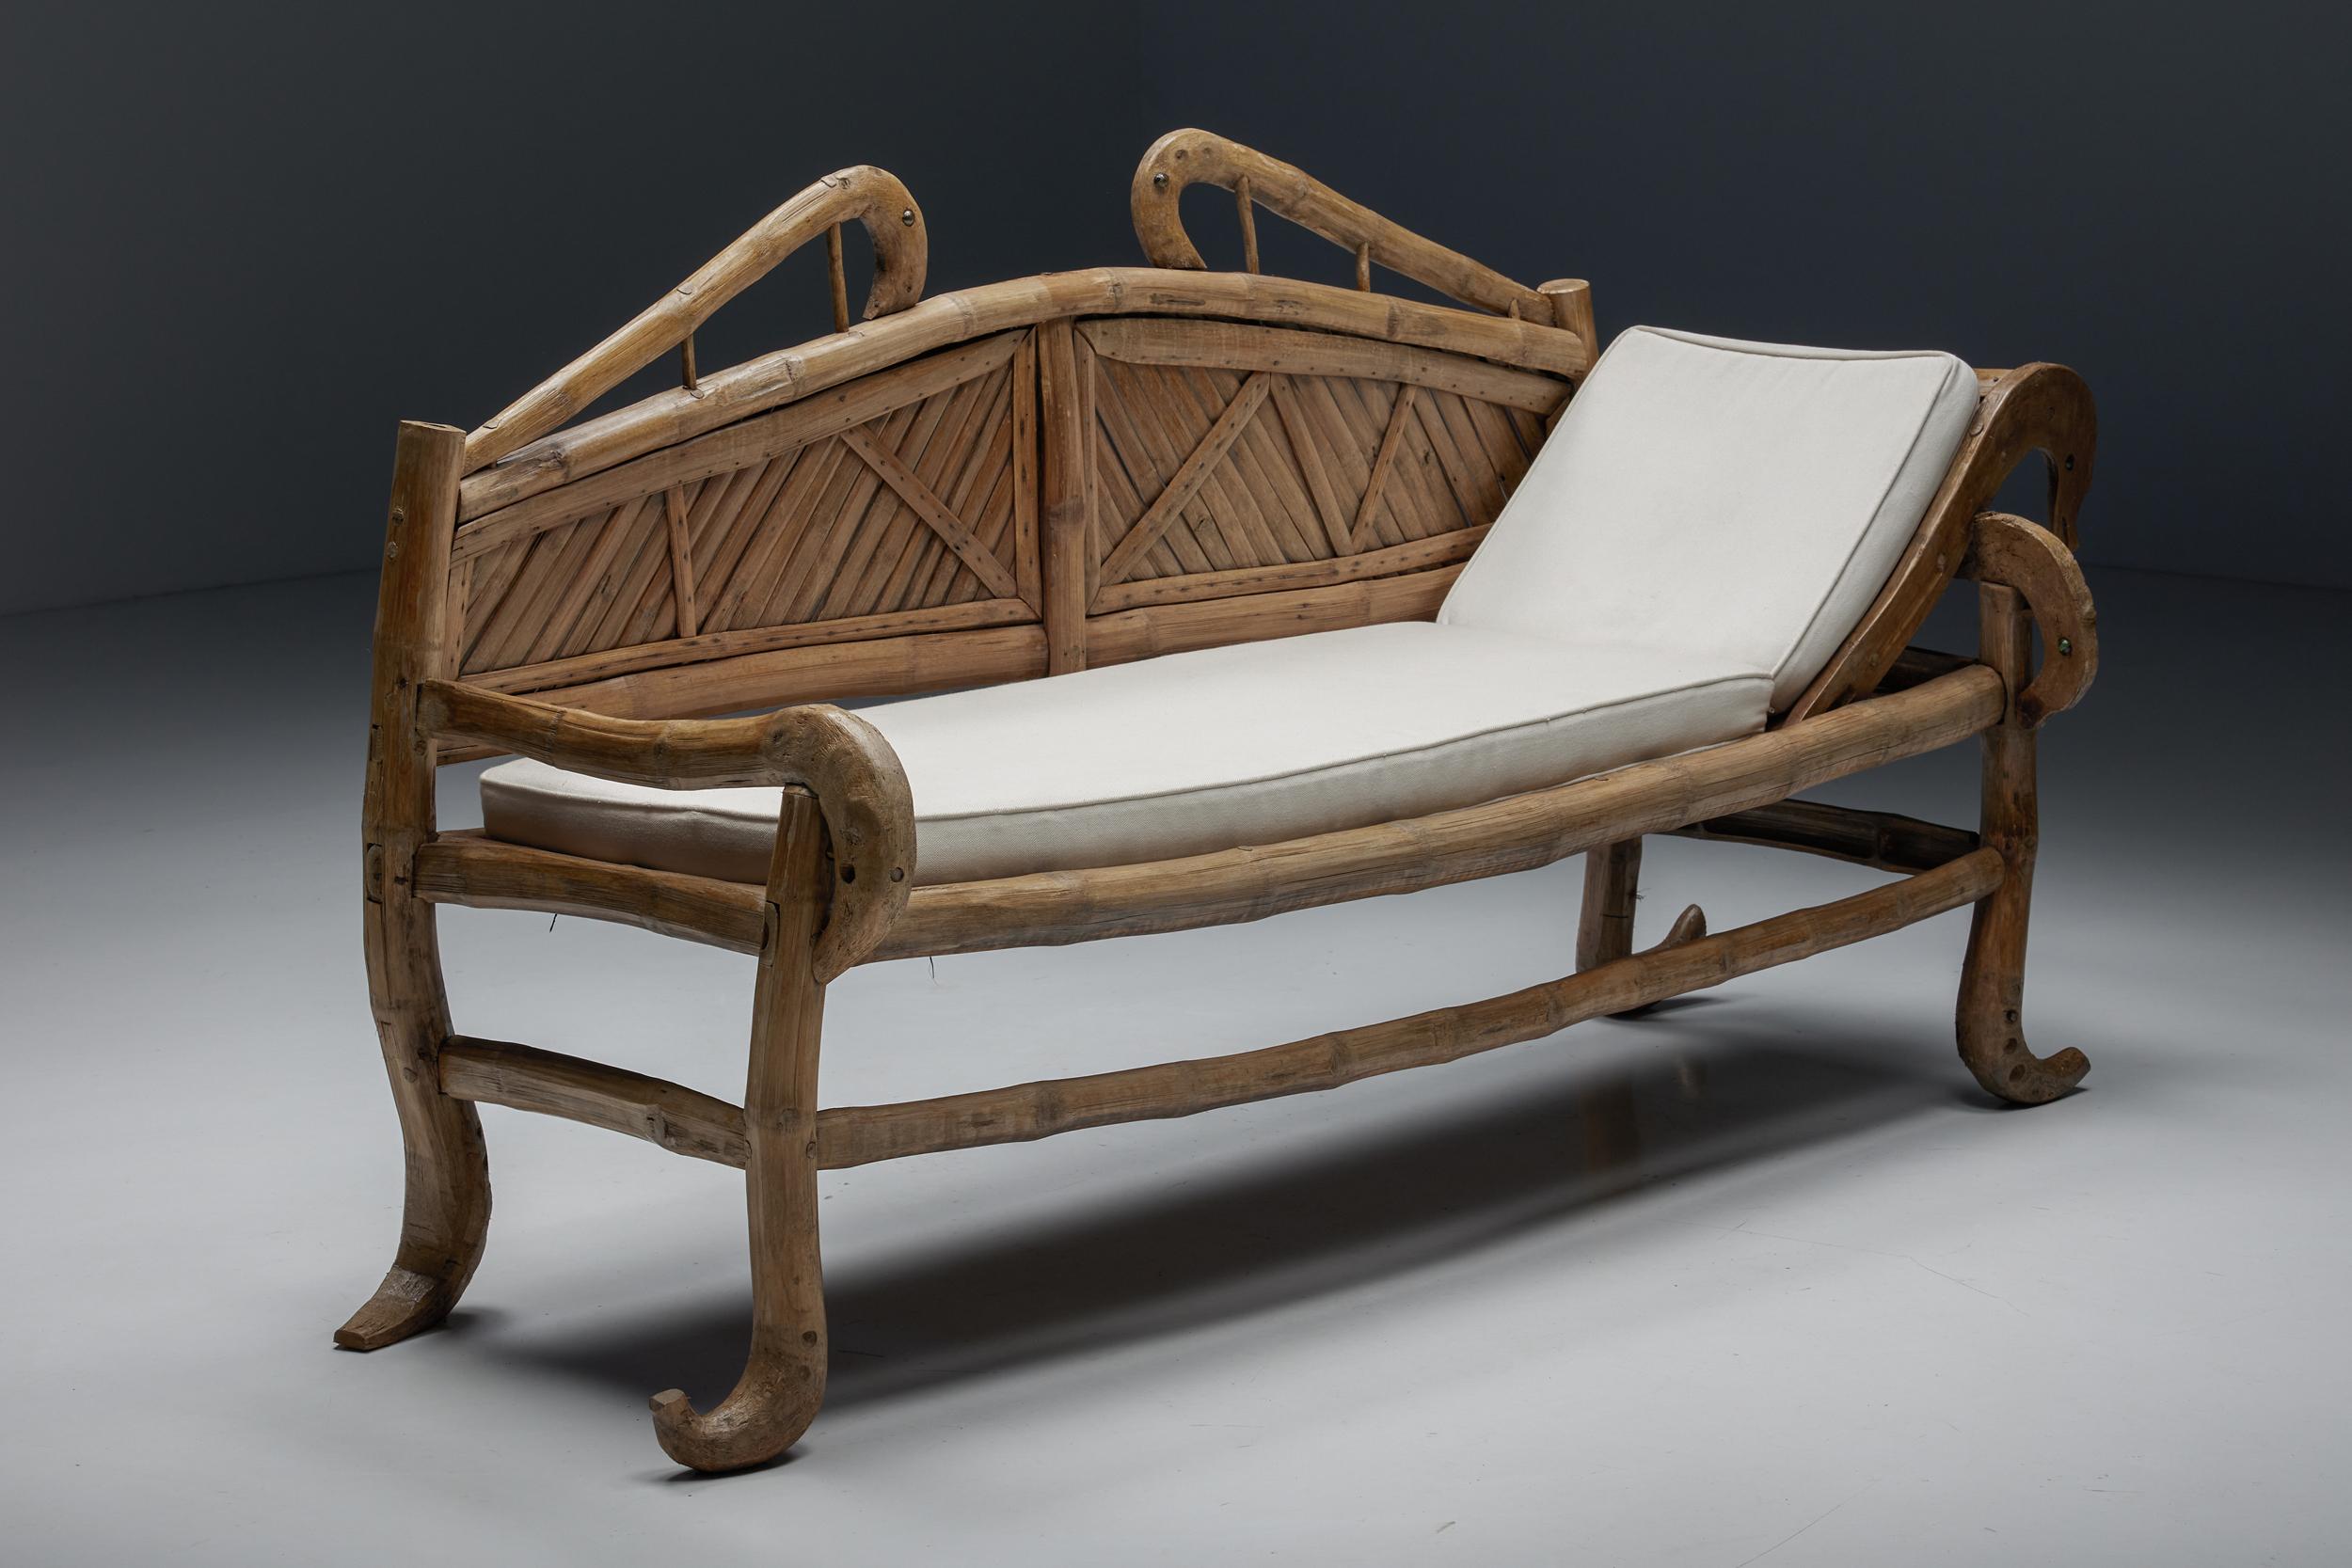 Oriental; bamboo; sofa-bed; daybed; 20th century; Bohemian; French; organic; curved; bench;

A 20th-century oriental daybed made of bamboo, raised on four organic legs ending in a curled foot and connected by three spacer bars. The backrest is also